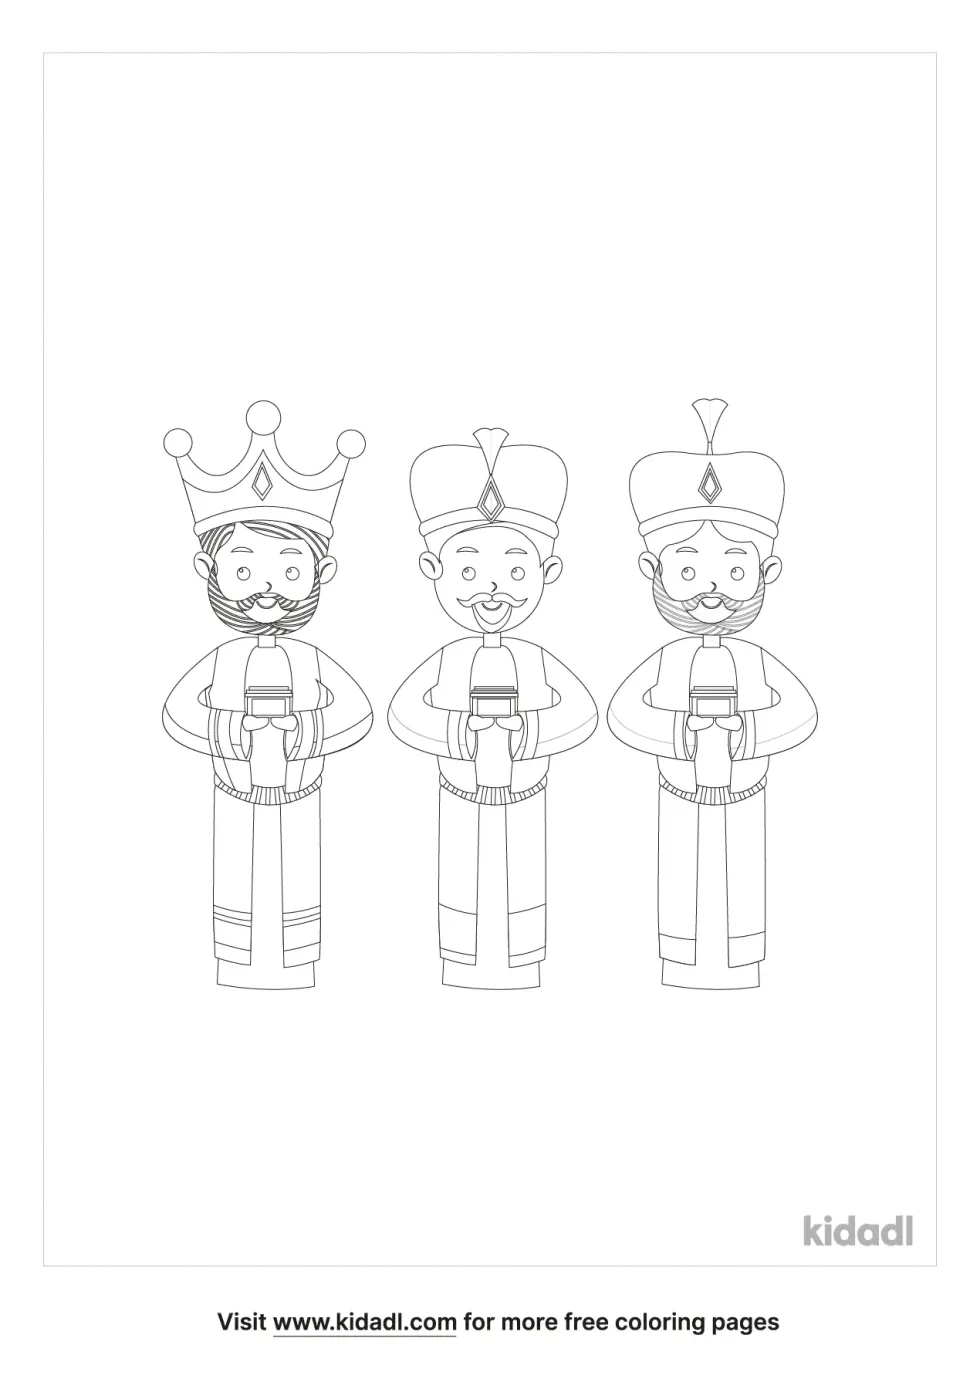 Christmas Wiseman Coloring Page